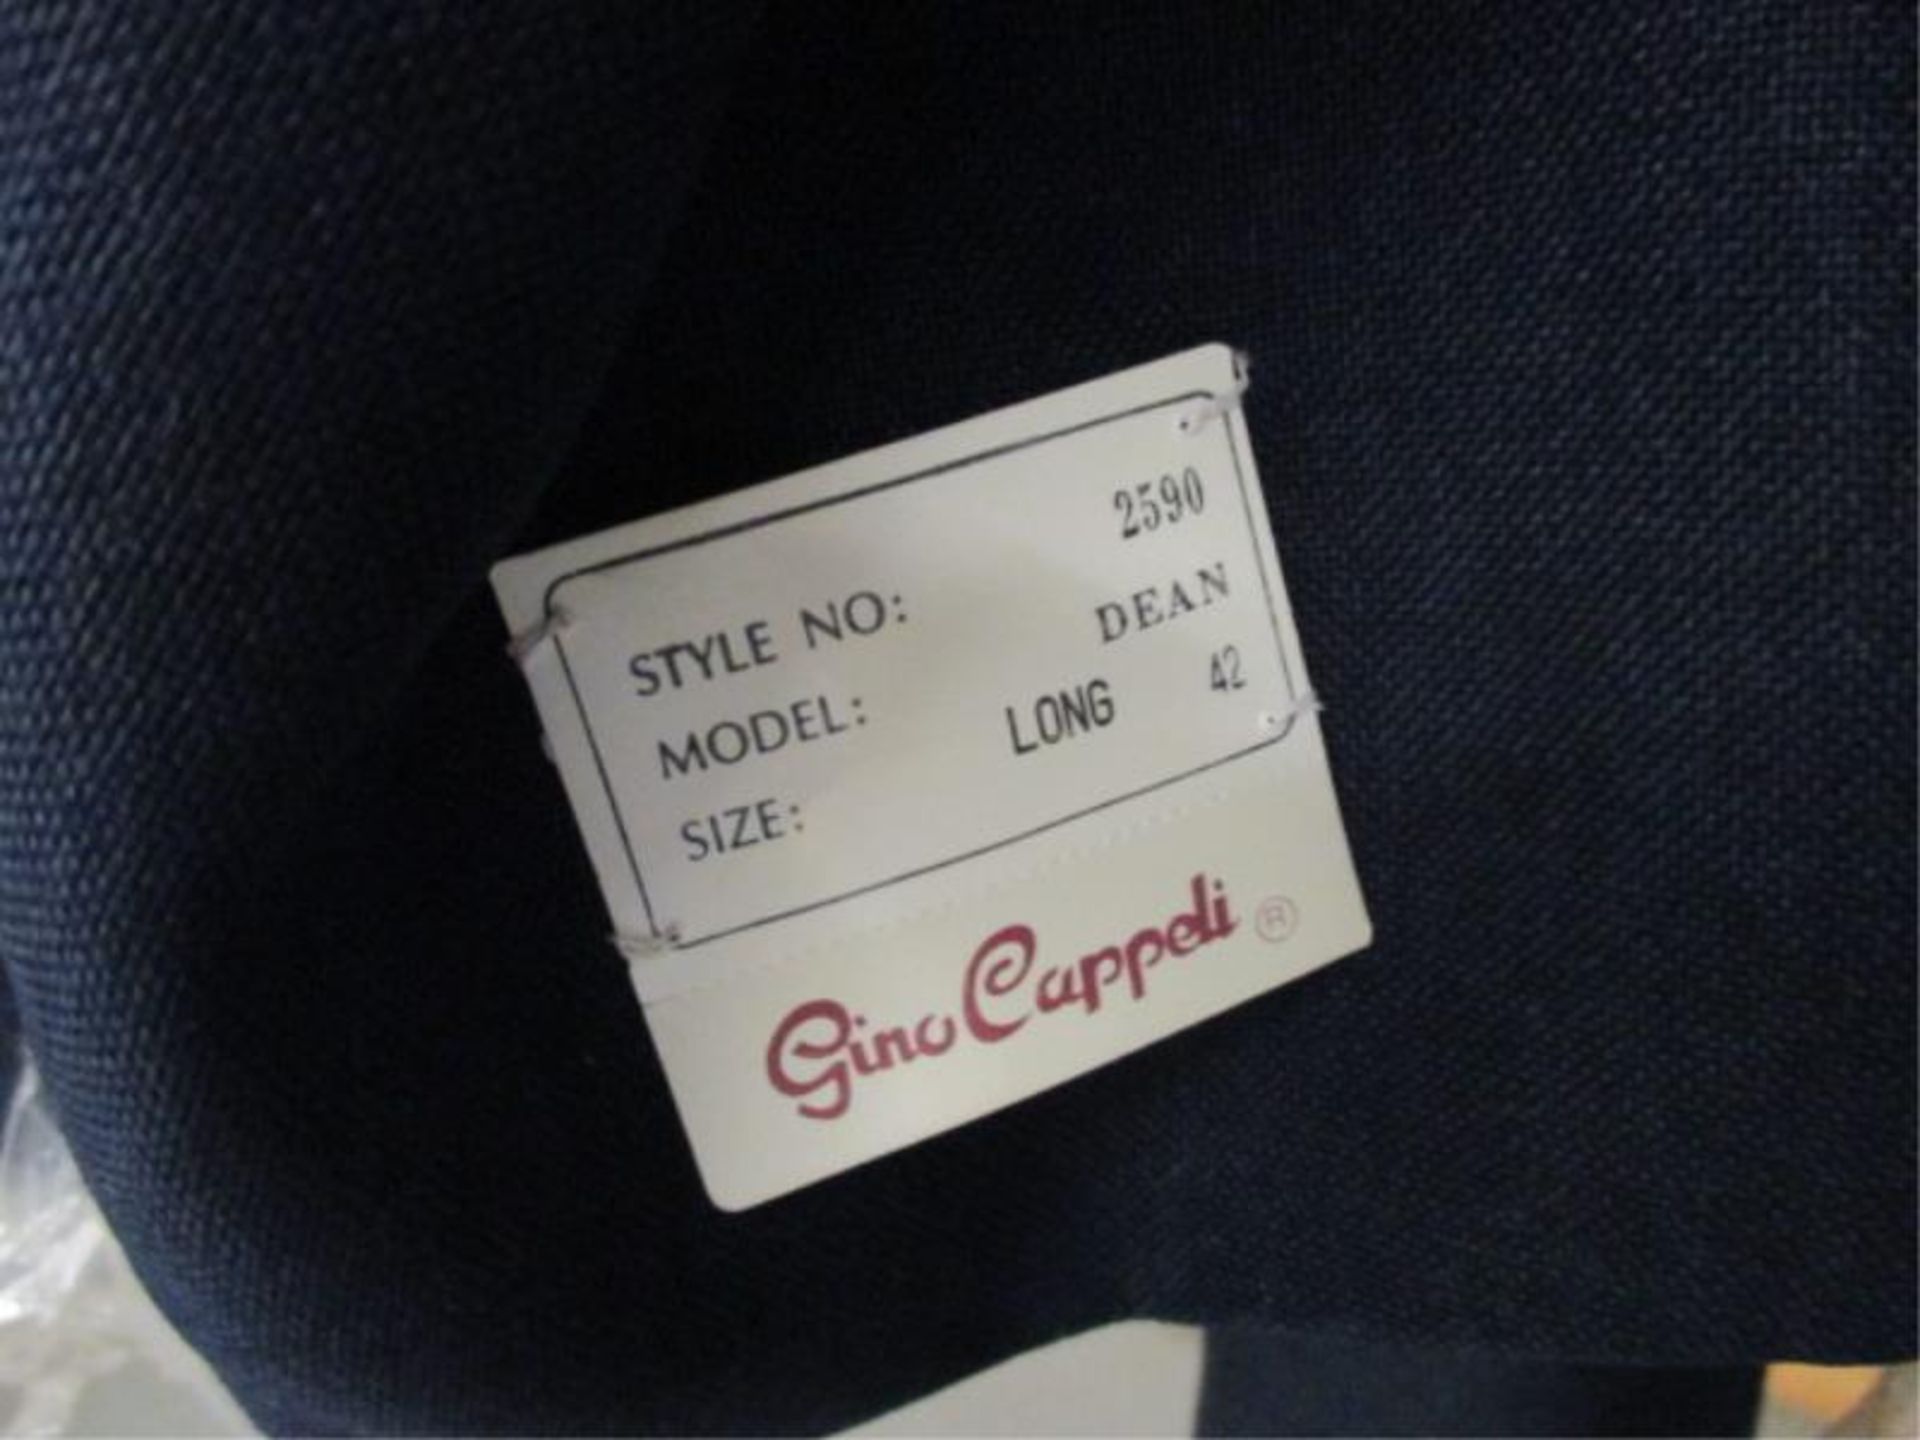 Tailored Blazer, Approx. 68 Men's Sizes: 36-50L, By Gino Cappeli Felix, Chaps - Image 5 of 9